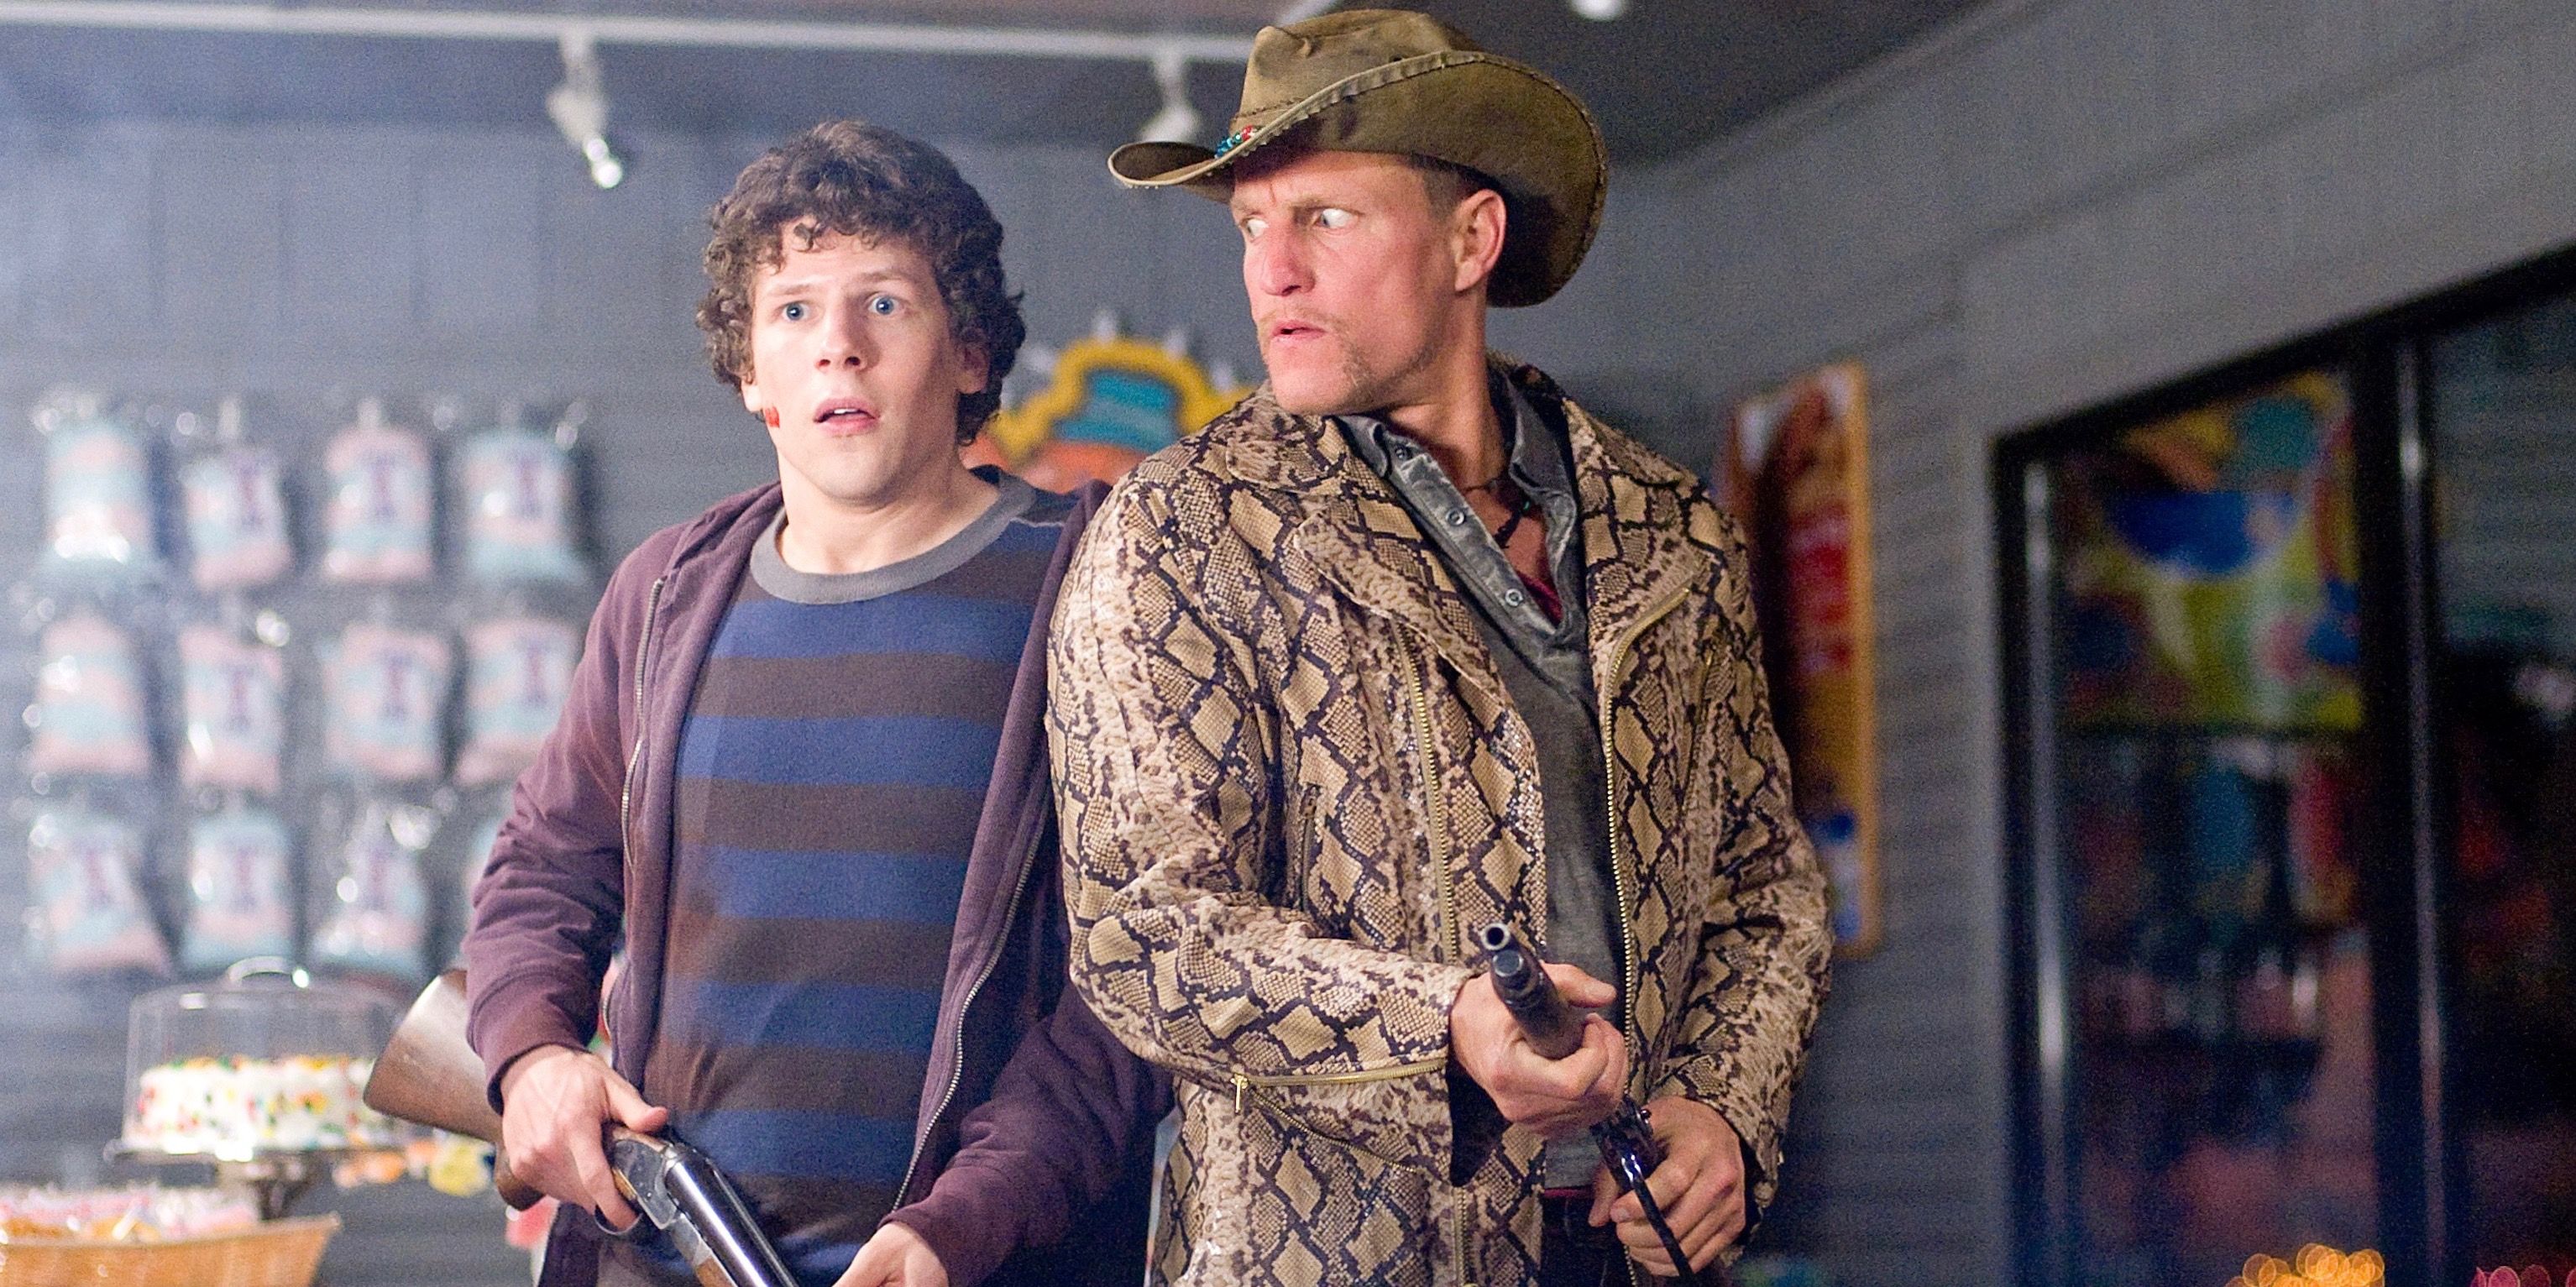 Woody Harrelson as Talahassee and Jesse Eisenberg as Columbus in Zombieland